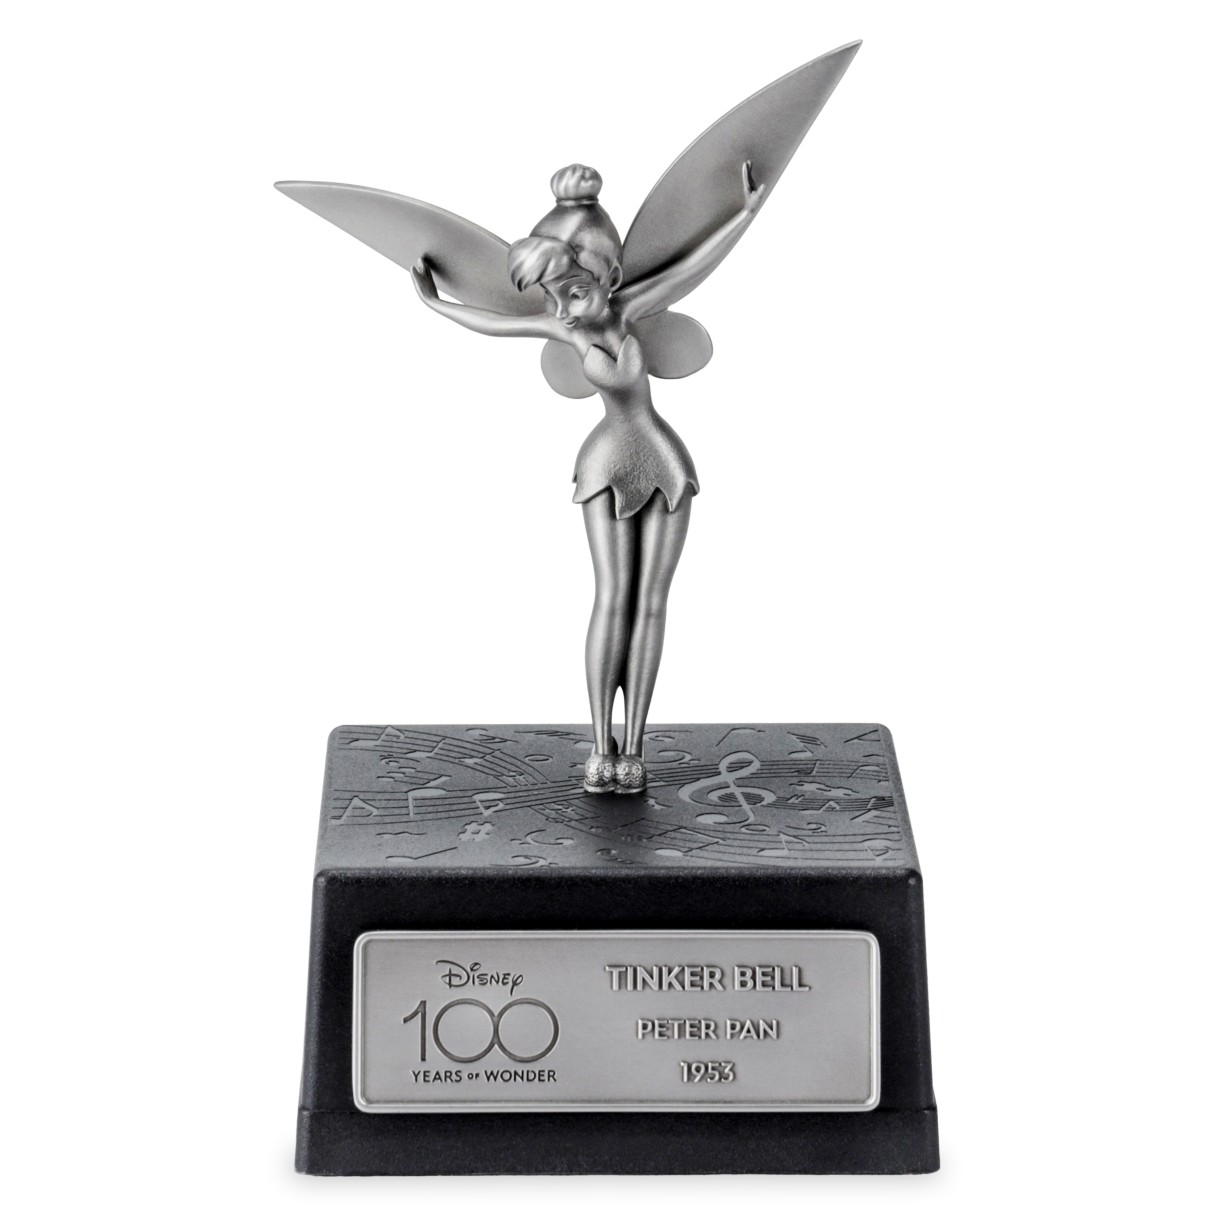 Tinker Bell Figure by Royal Selangor – Peter Pan – Disney100 – Limited Edition